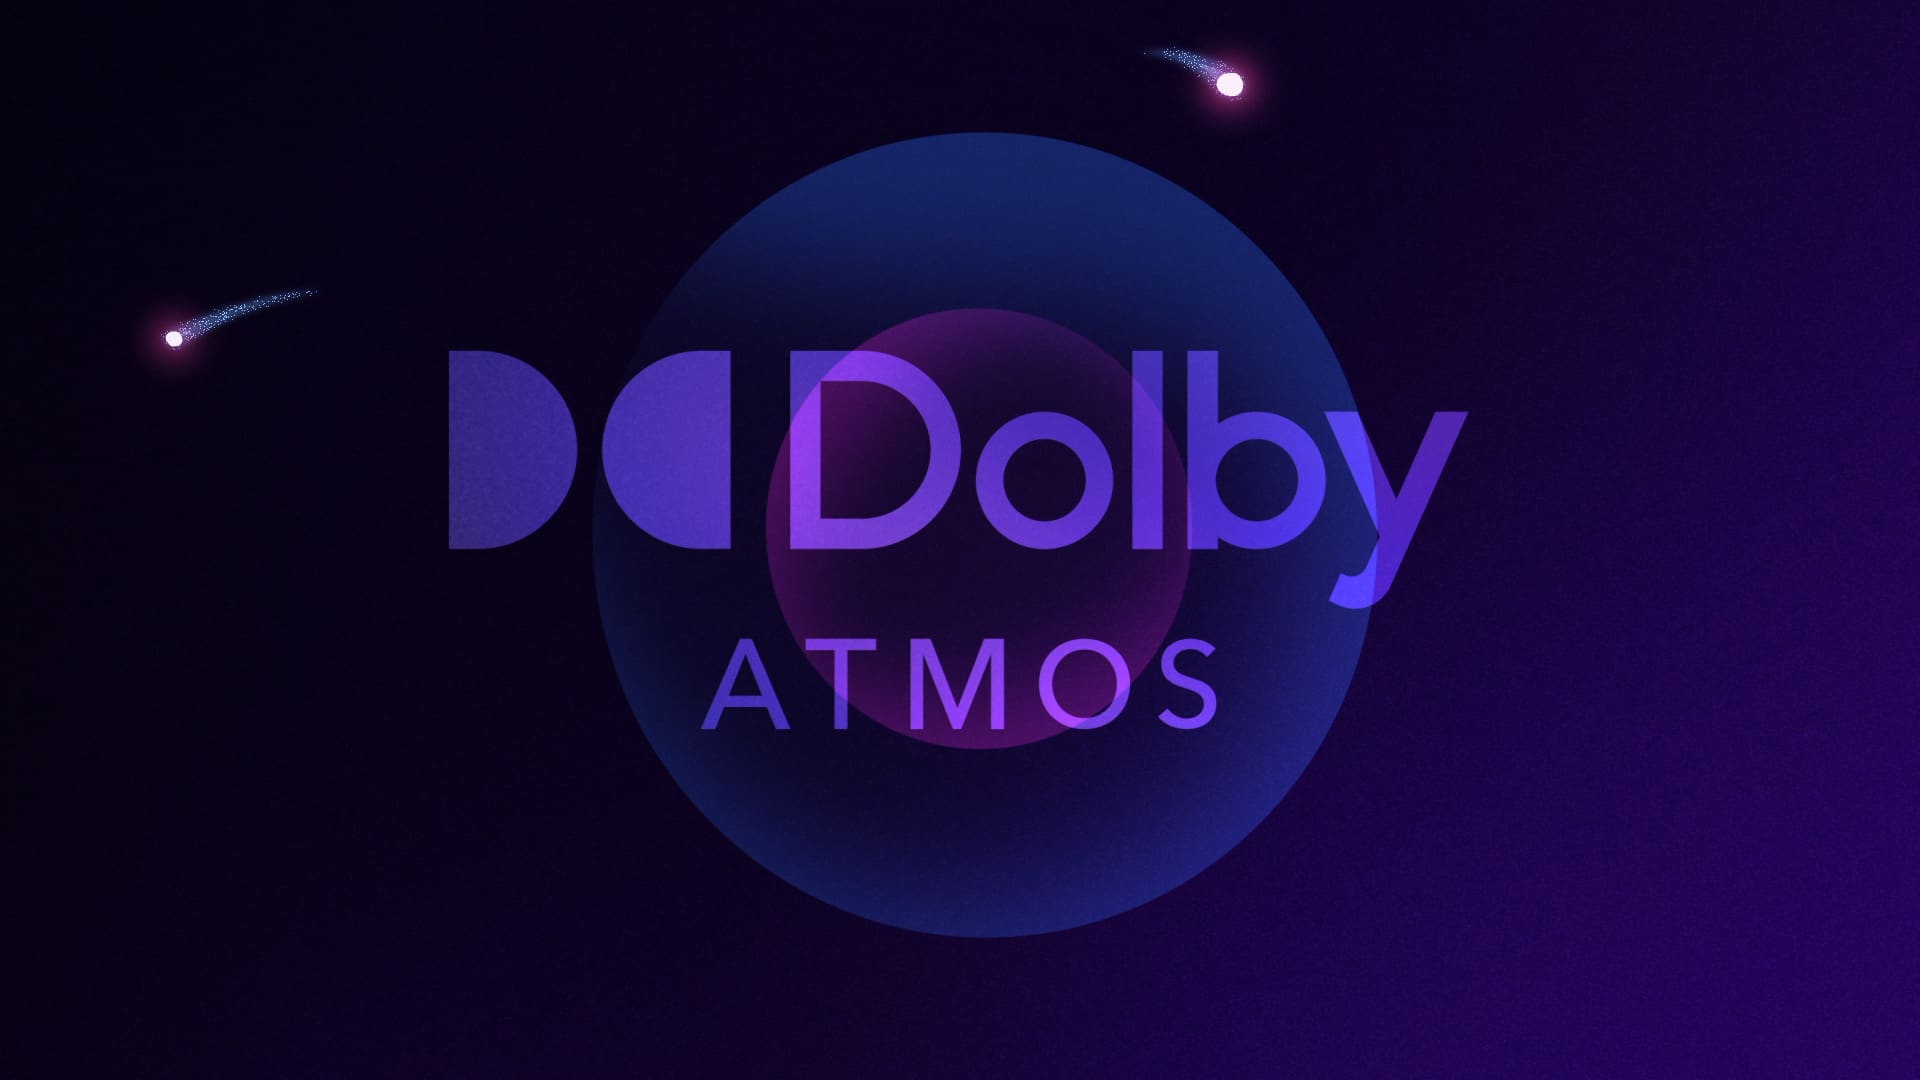 Is Dolby Atmos worth it? - Majority